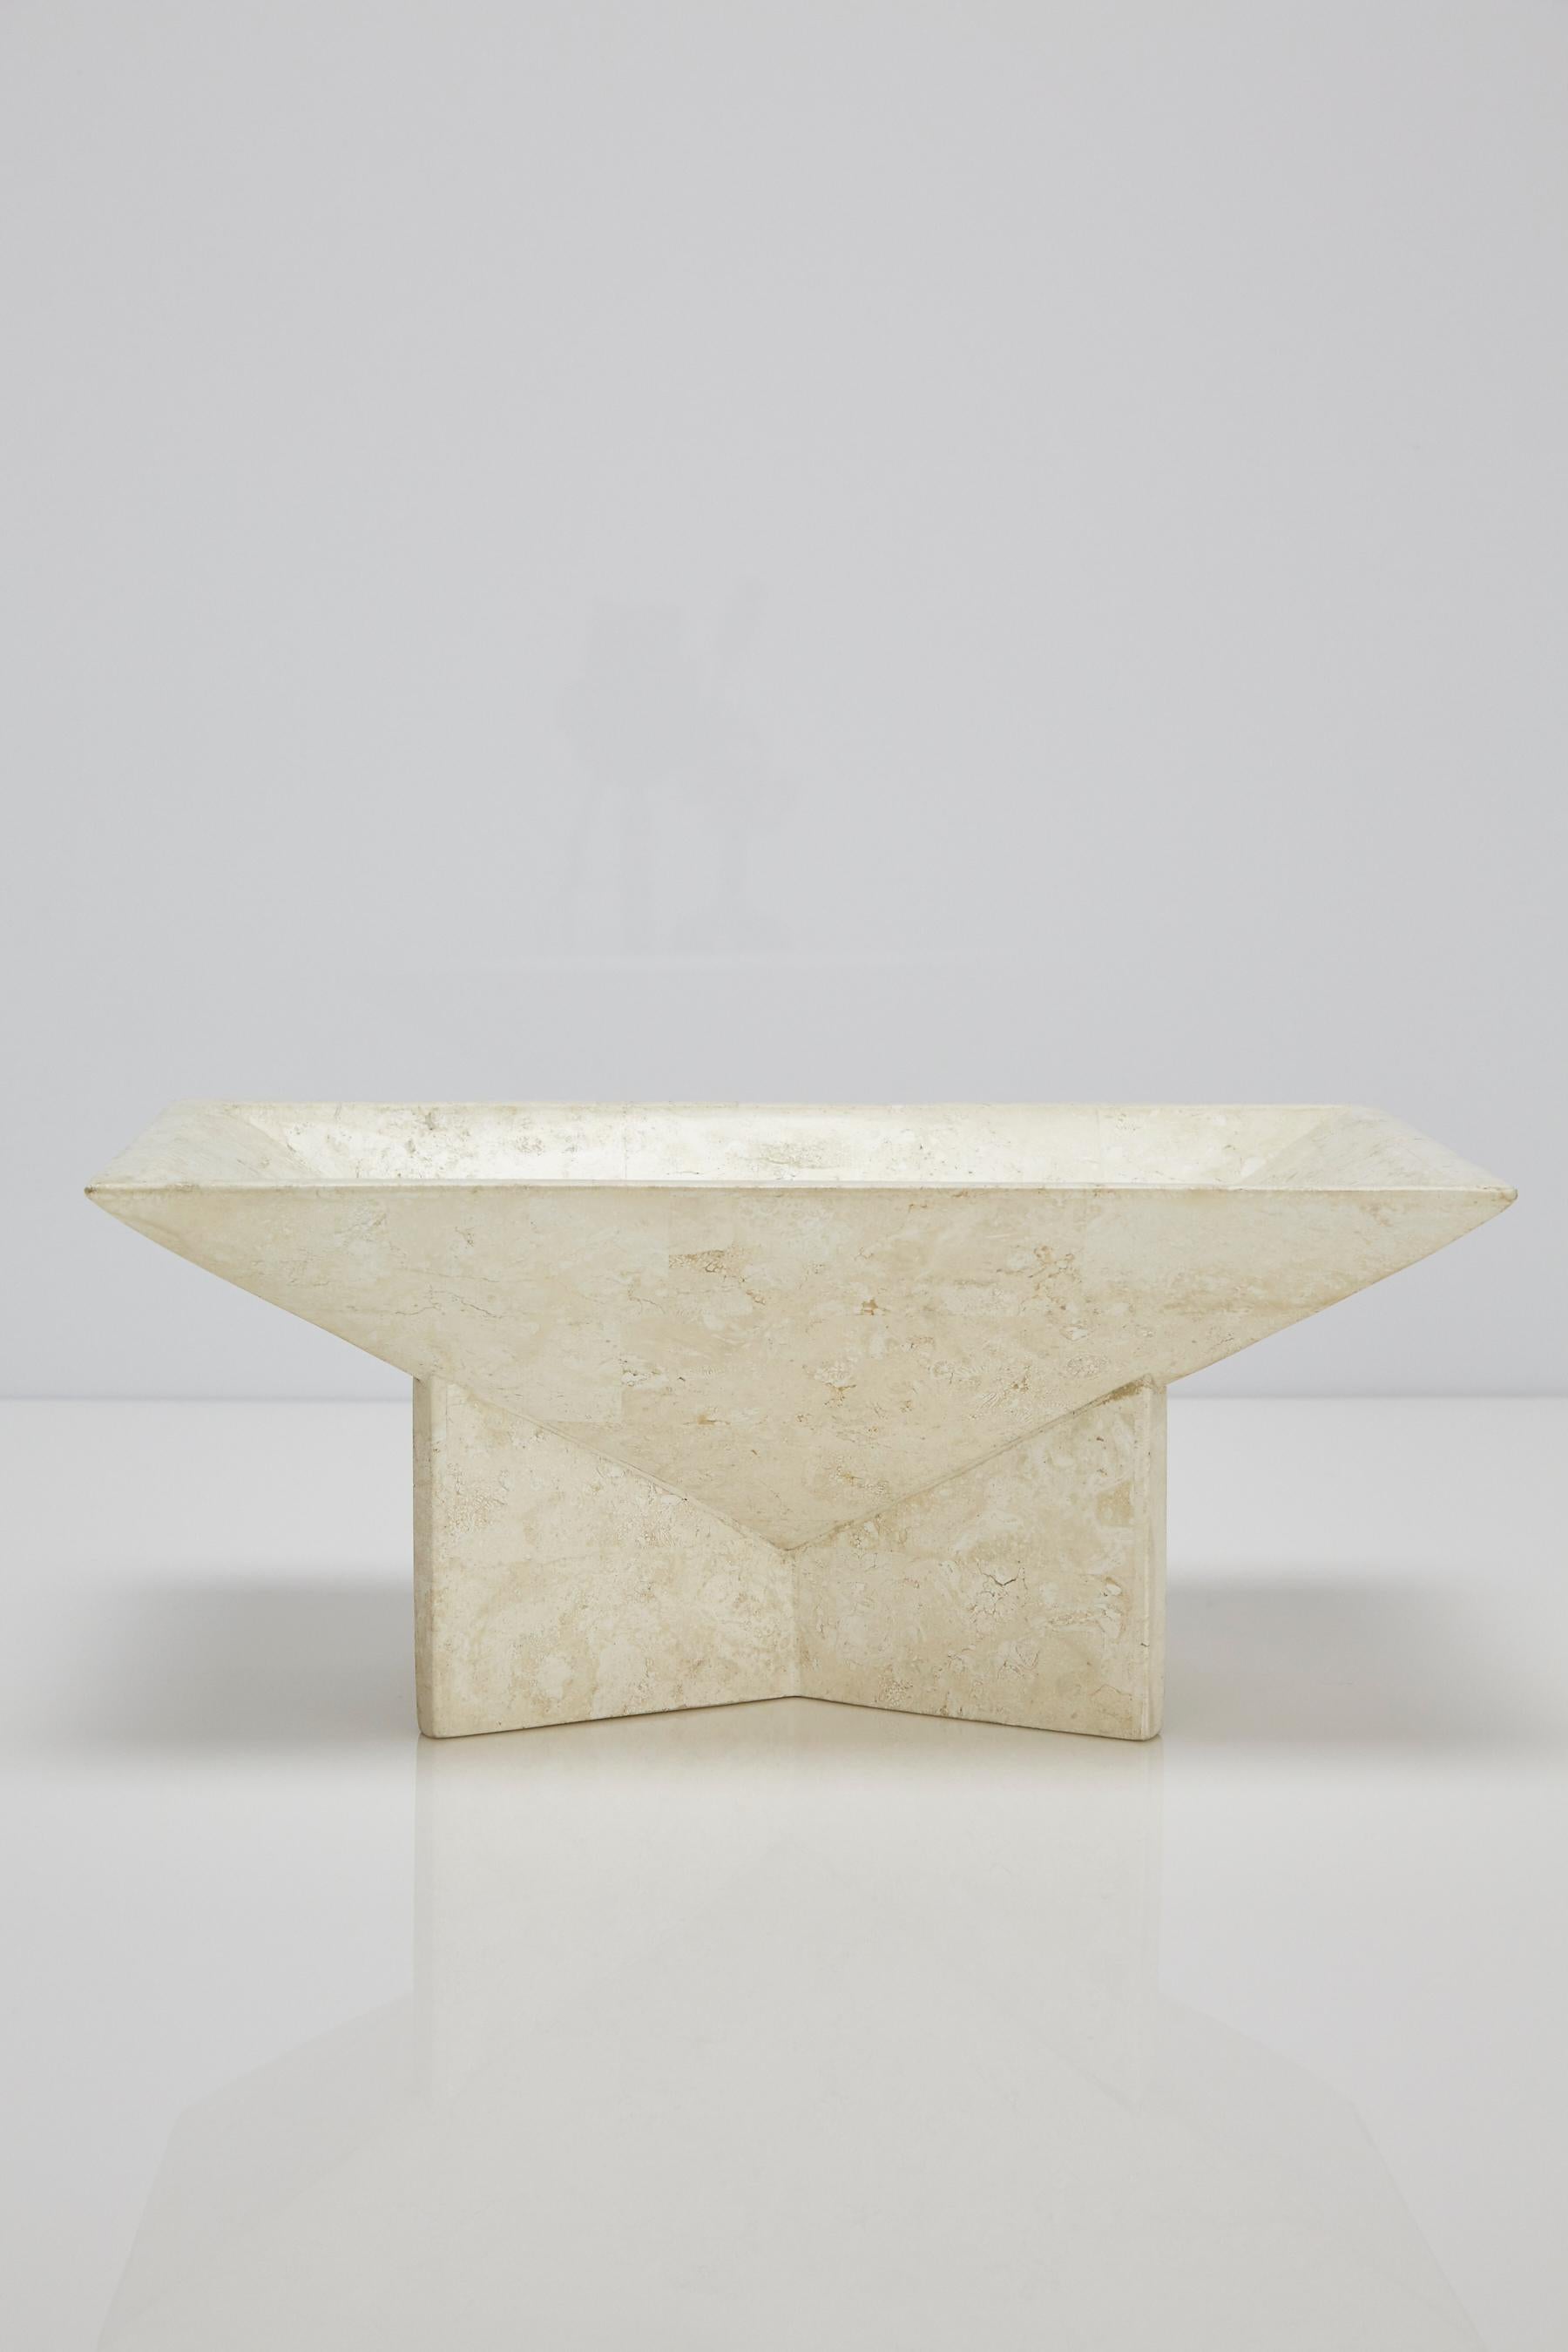 Modernist rectangular bowl on an elevated base. Entire piece covered in ivory white tessellated stone.

All furnishings are made from 100% natural Fossil Stone or Seashell inlay, carefully hand cut and crafted piece-by-piece and precisely inlaid to